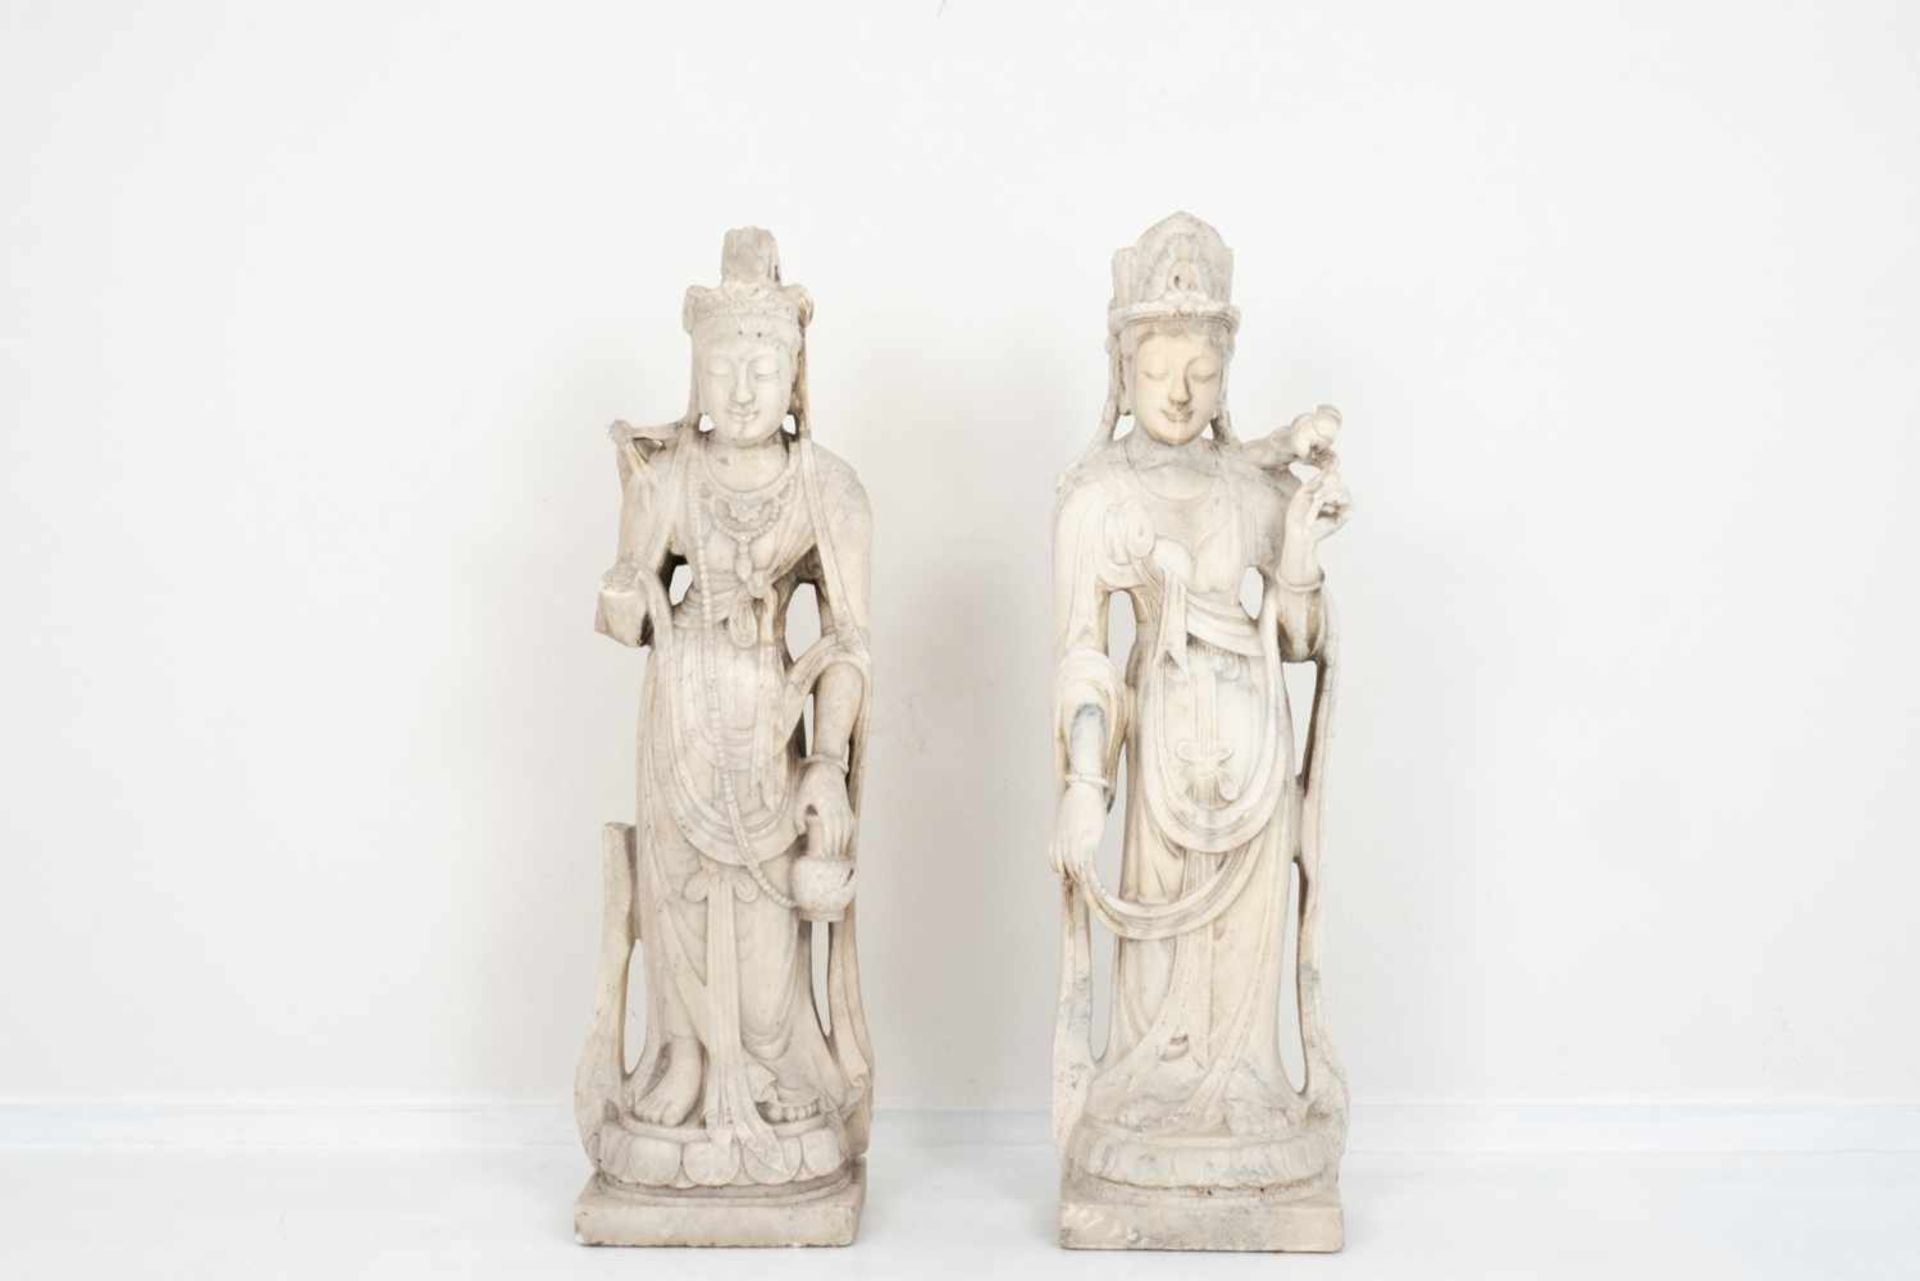 Pair of standing Guanyin "goddesses"